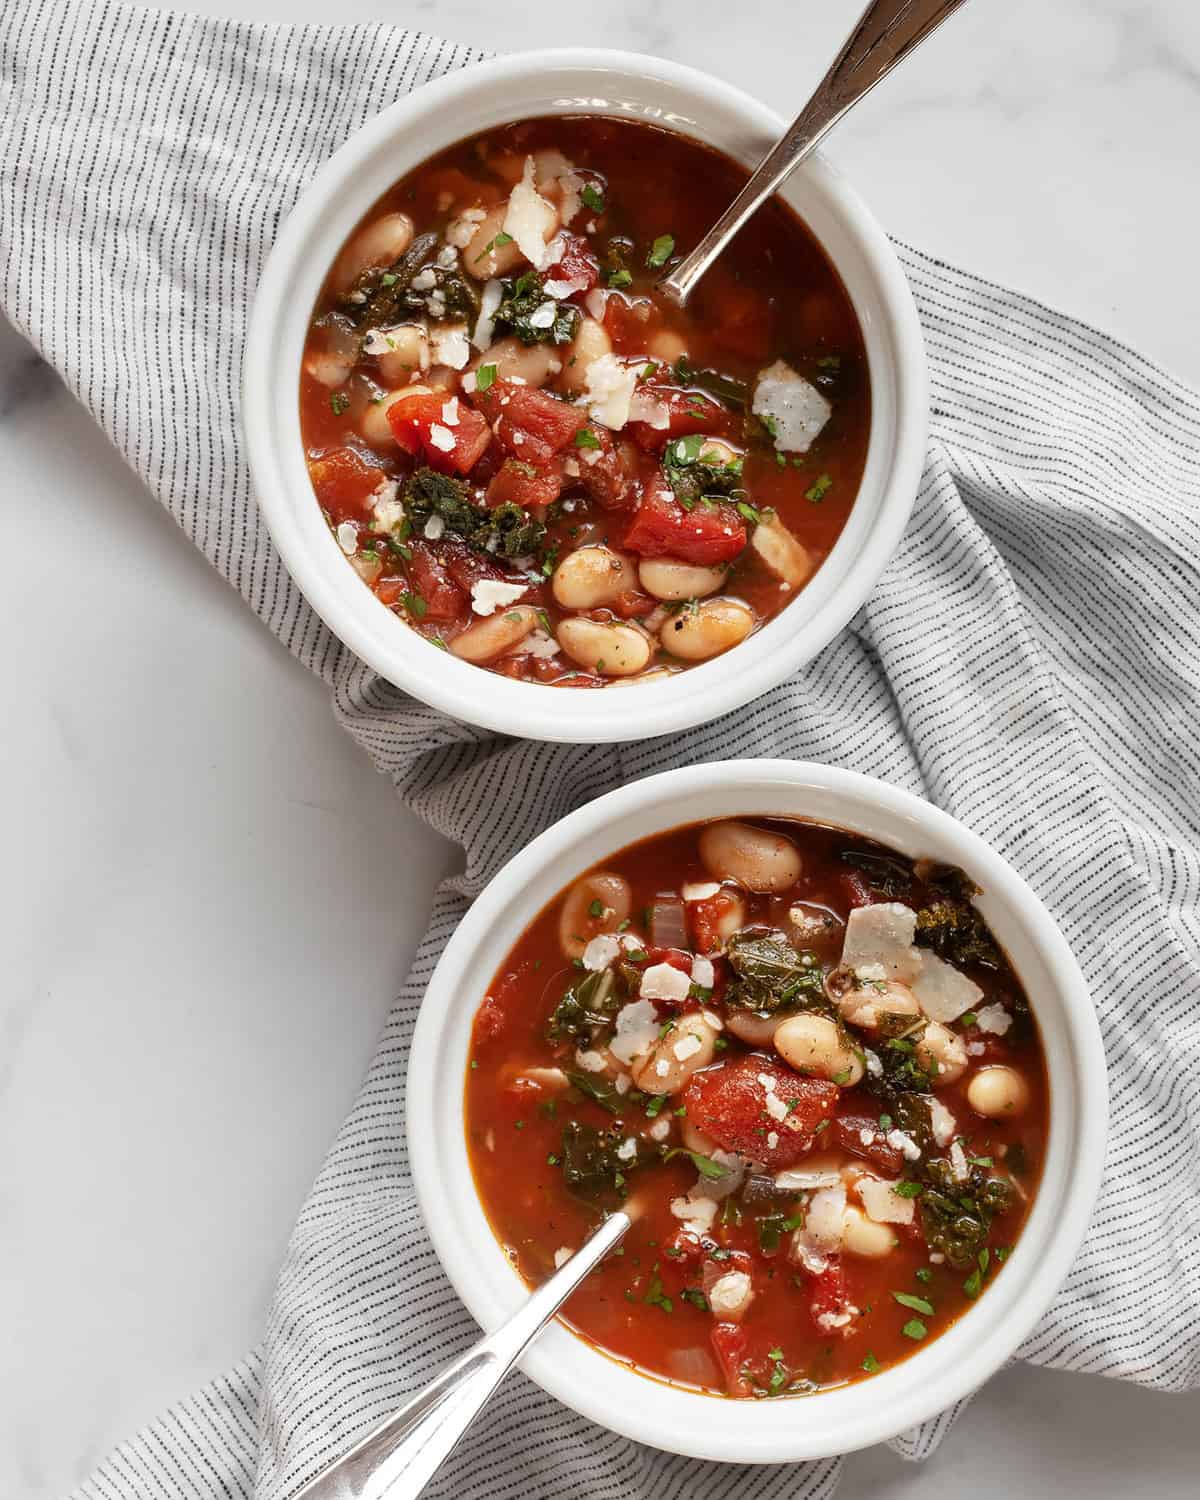 Two bowls of rosemary white bean tomato soup.